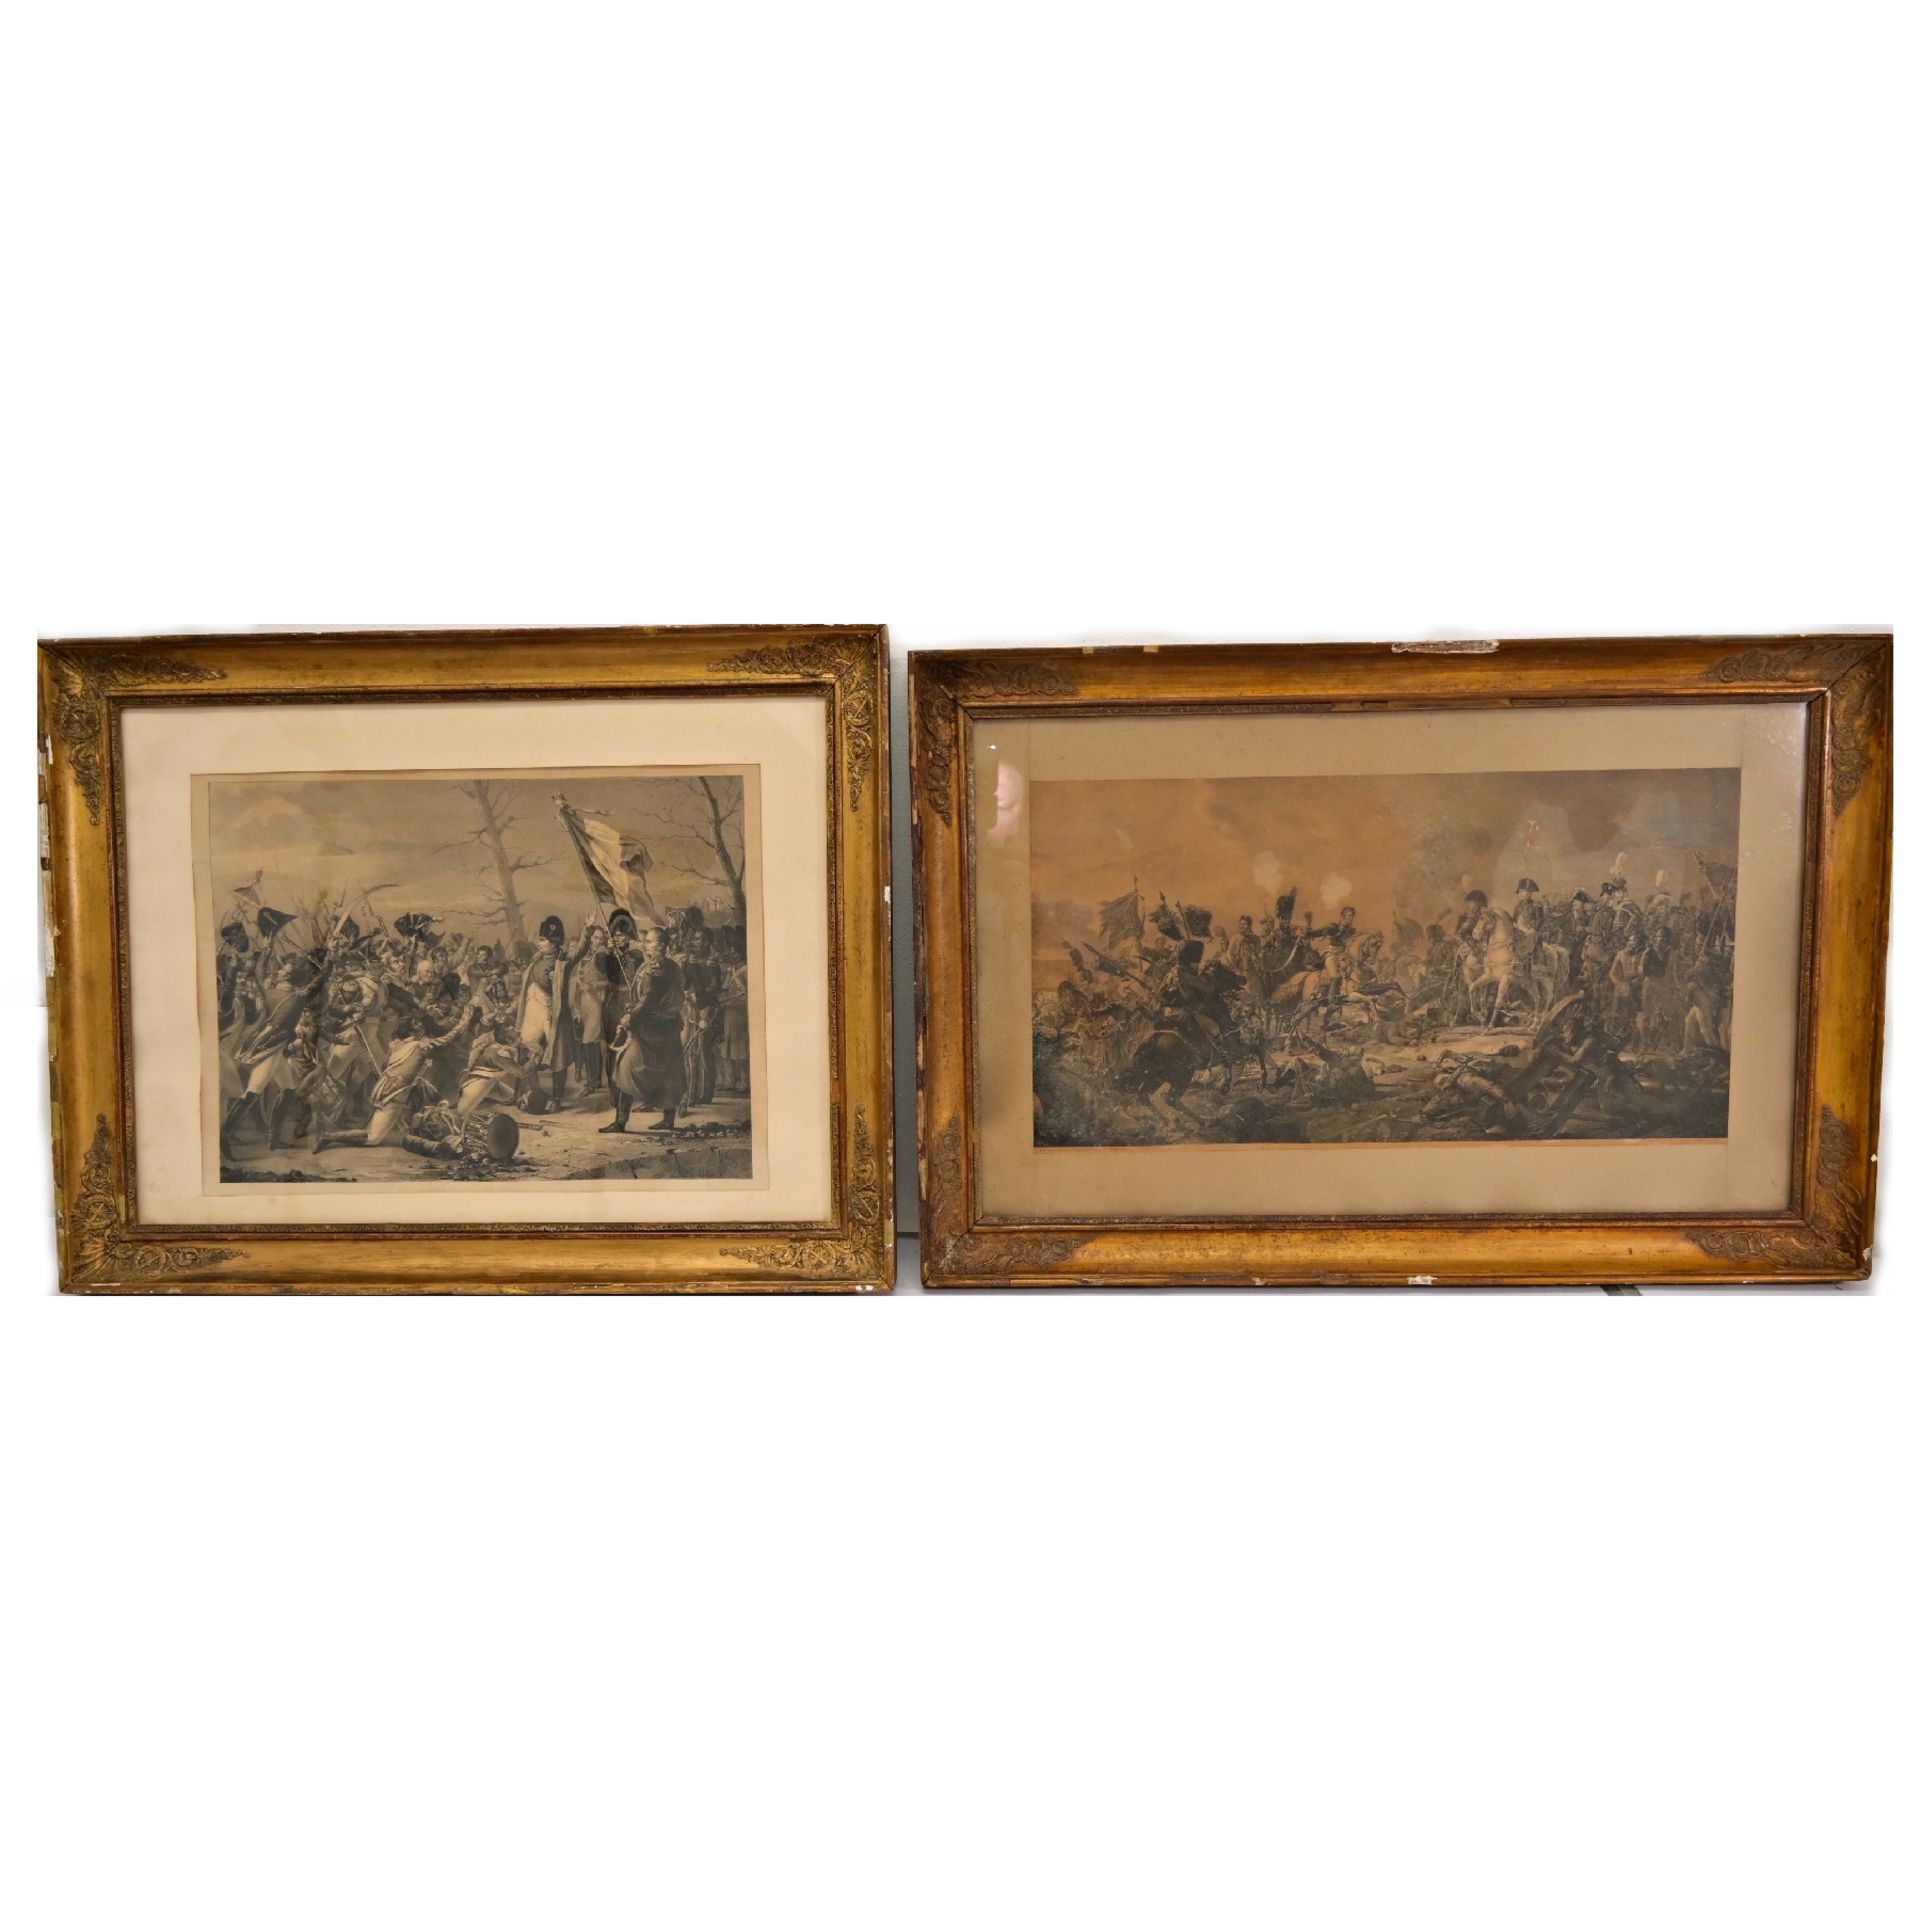 A pair of large engravings, an image of Napoleon and the Russian Campaign 1812. France, 19th c.